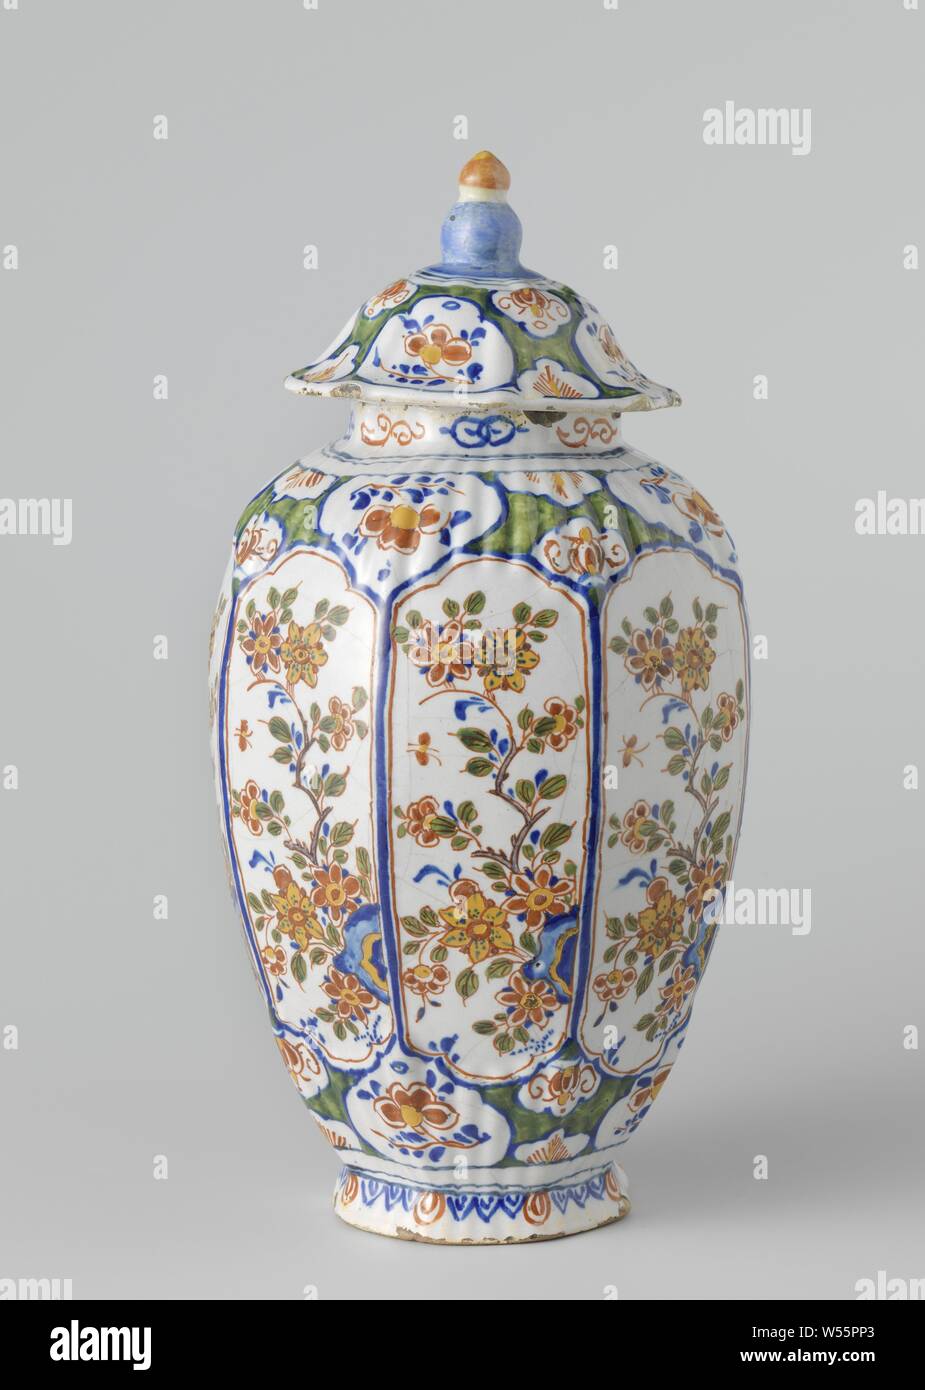 Lid, octagonal arched, with knob, polychrome decorated with flower sprays inside cartouches, De Twee Scheepjes, Delft, 1707 - 1727, earthenware, h 8 cm × d 11 cm Stock Photo